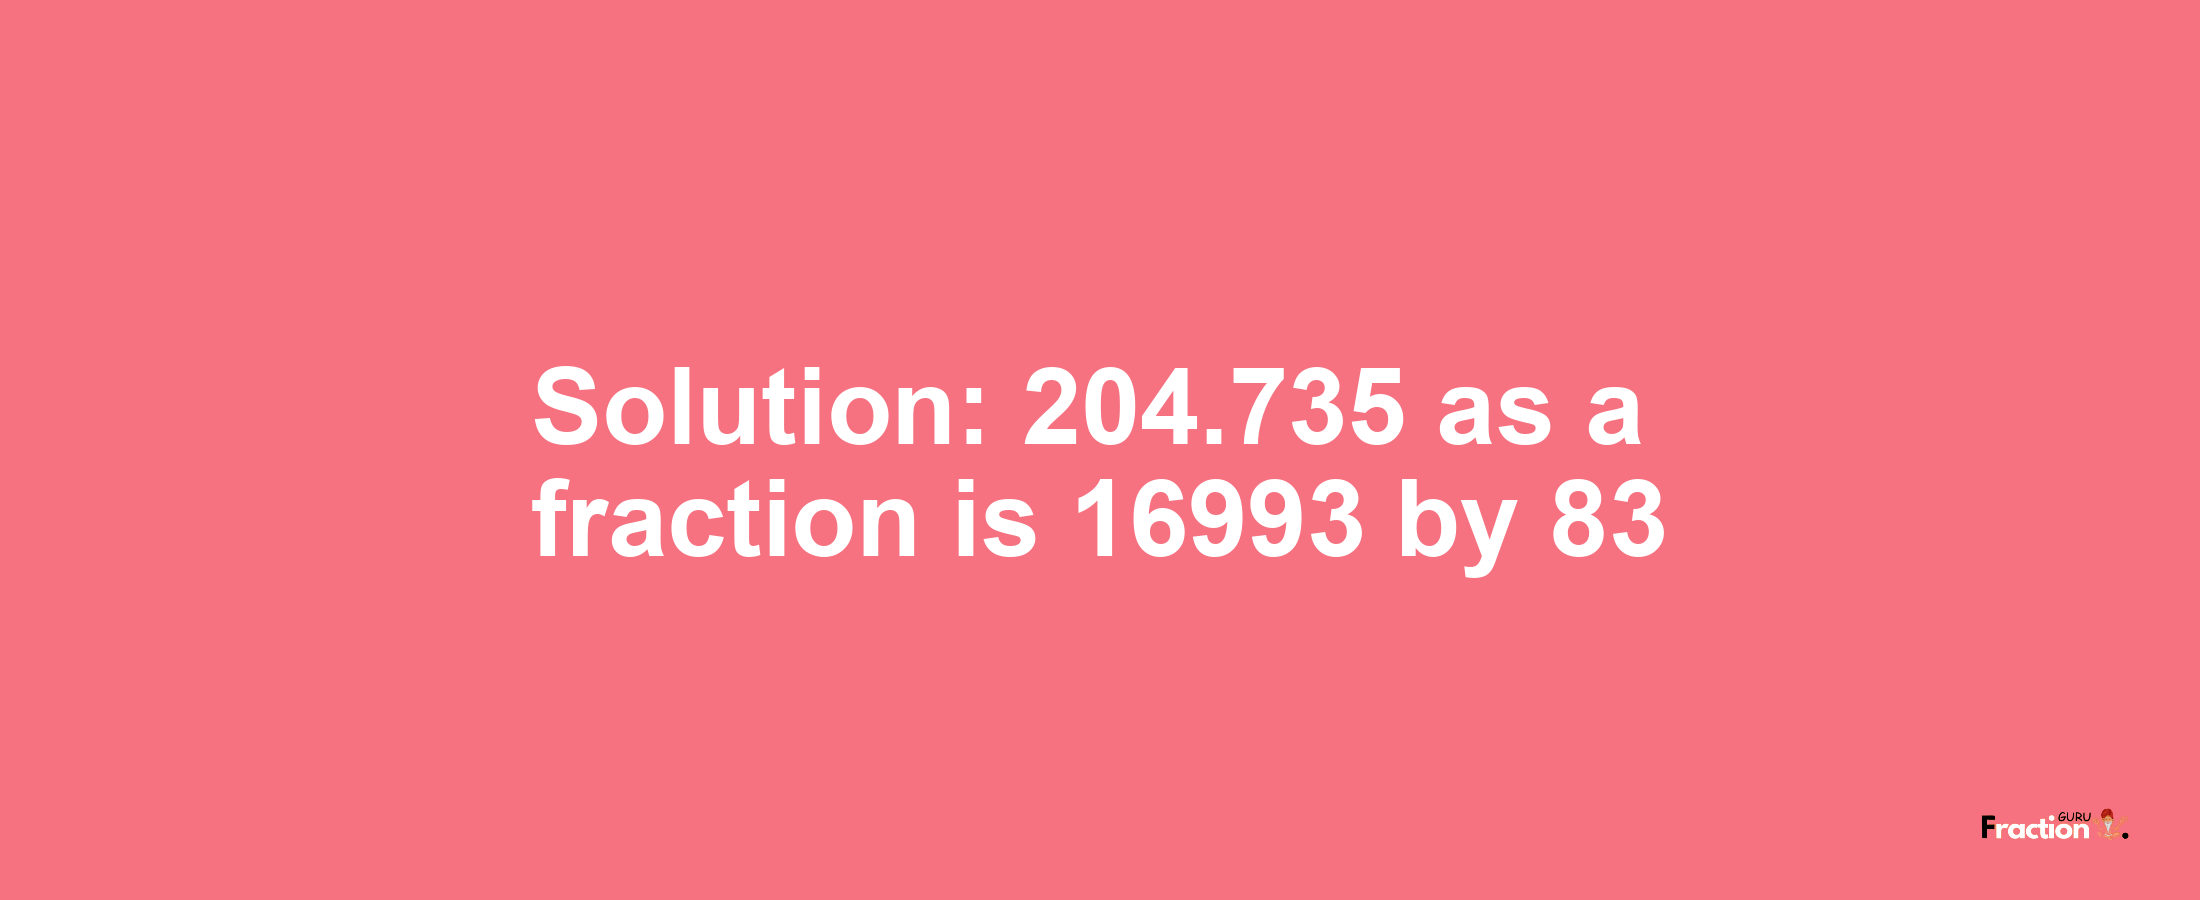 Solution:204.735 as a fraction is 16993/83